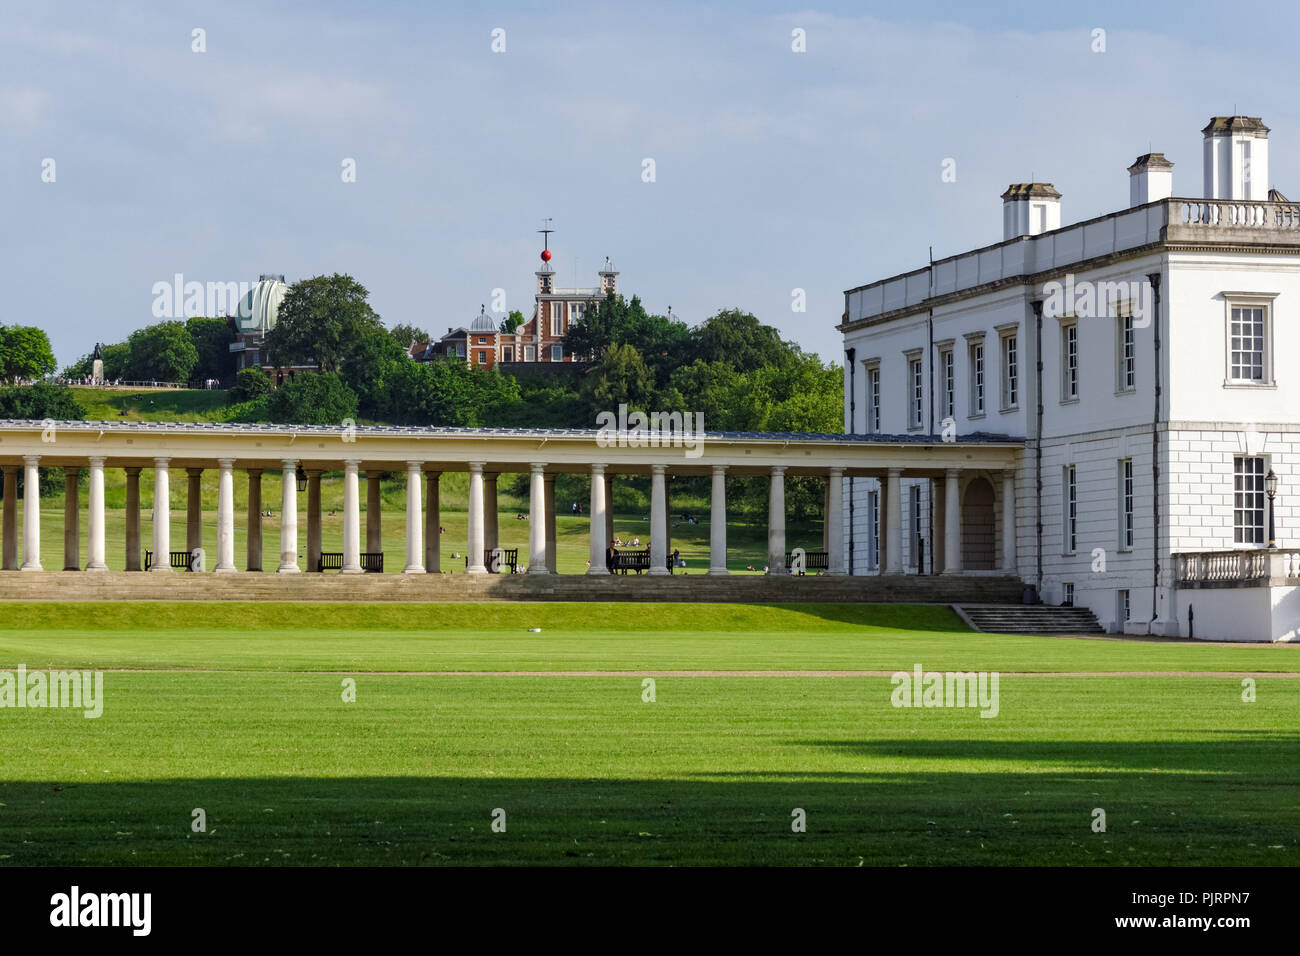 The historic Queen's House in Greenwich Park with The Royal Observatory in the background, London, England, United Kingdom, UK Stock Photo